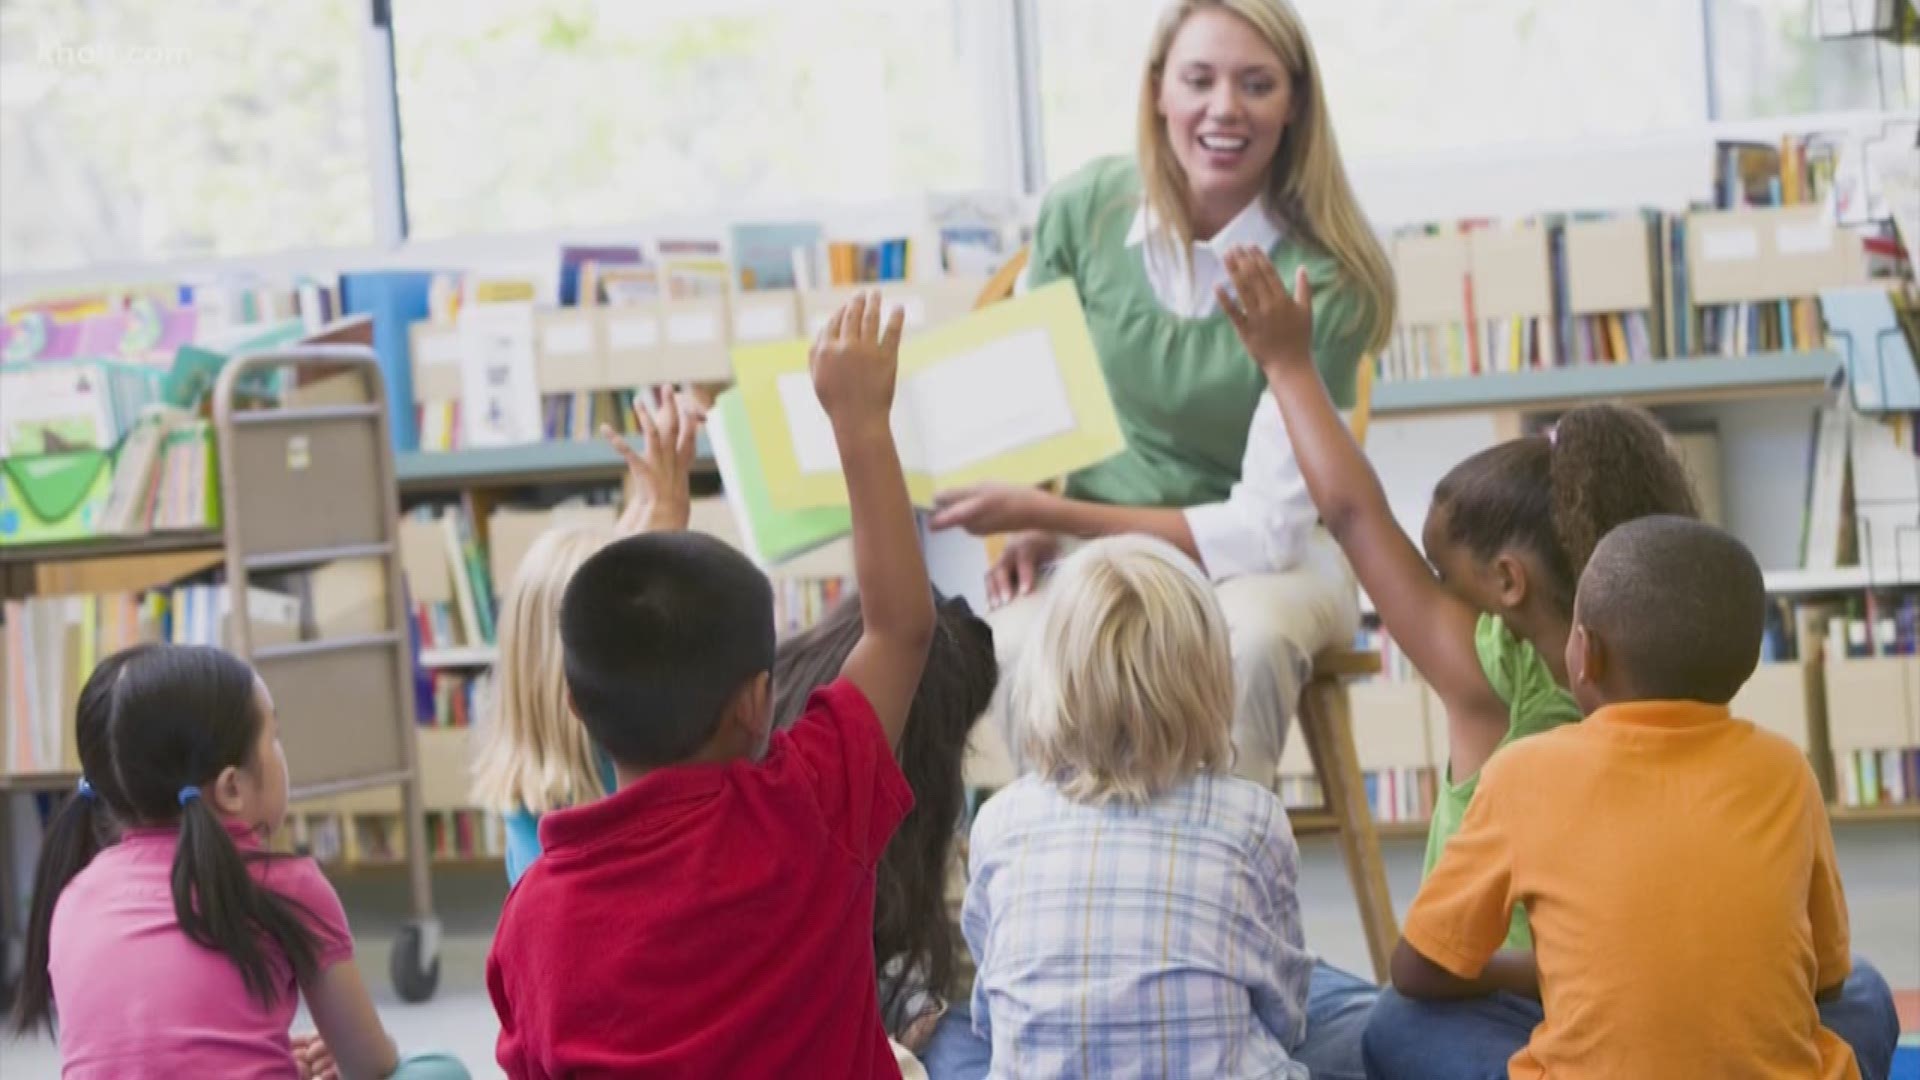 Once upon a time preschool teachers and parents asked children too many easy questions when they read to them. Here's how researchers want to help change that narrative.